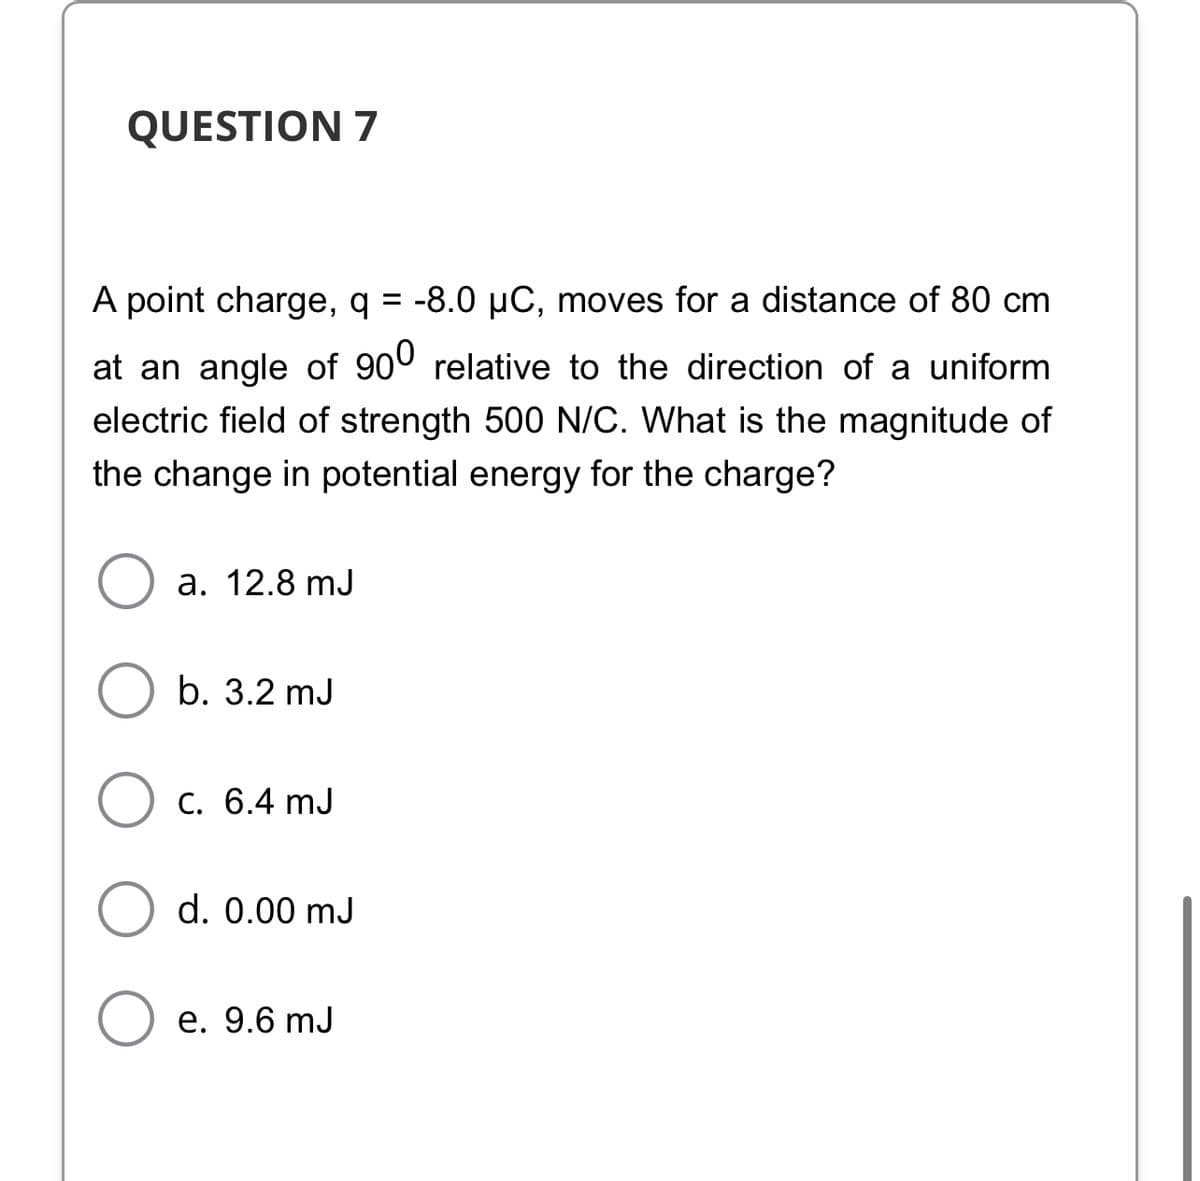 QUESTION 7
A point charge, q = -8.0 µC, moves for a distance of 80 cm
at an angle of 900 relative to the direction of a uniform
electric field of strength 500 N/C. What is the magnitude of
the change in potential energy for the charge?
а. 12.8 mJ
b. 3.2 mJ
С. 6.4 mJ
d. 0.00 mJ
е. 9.6 mJ
